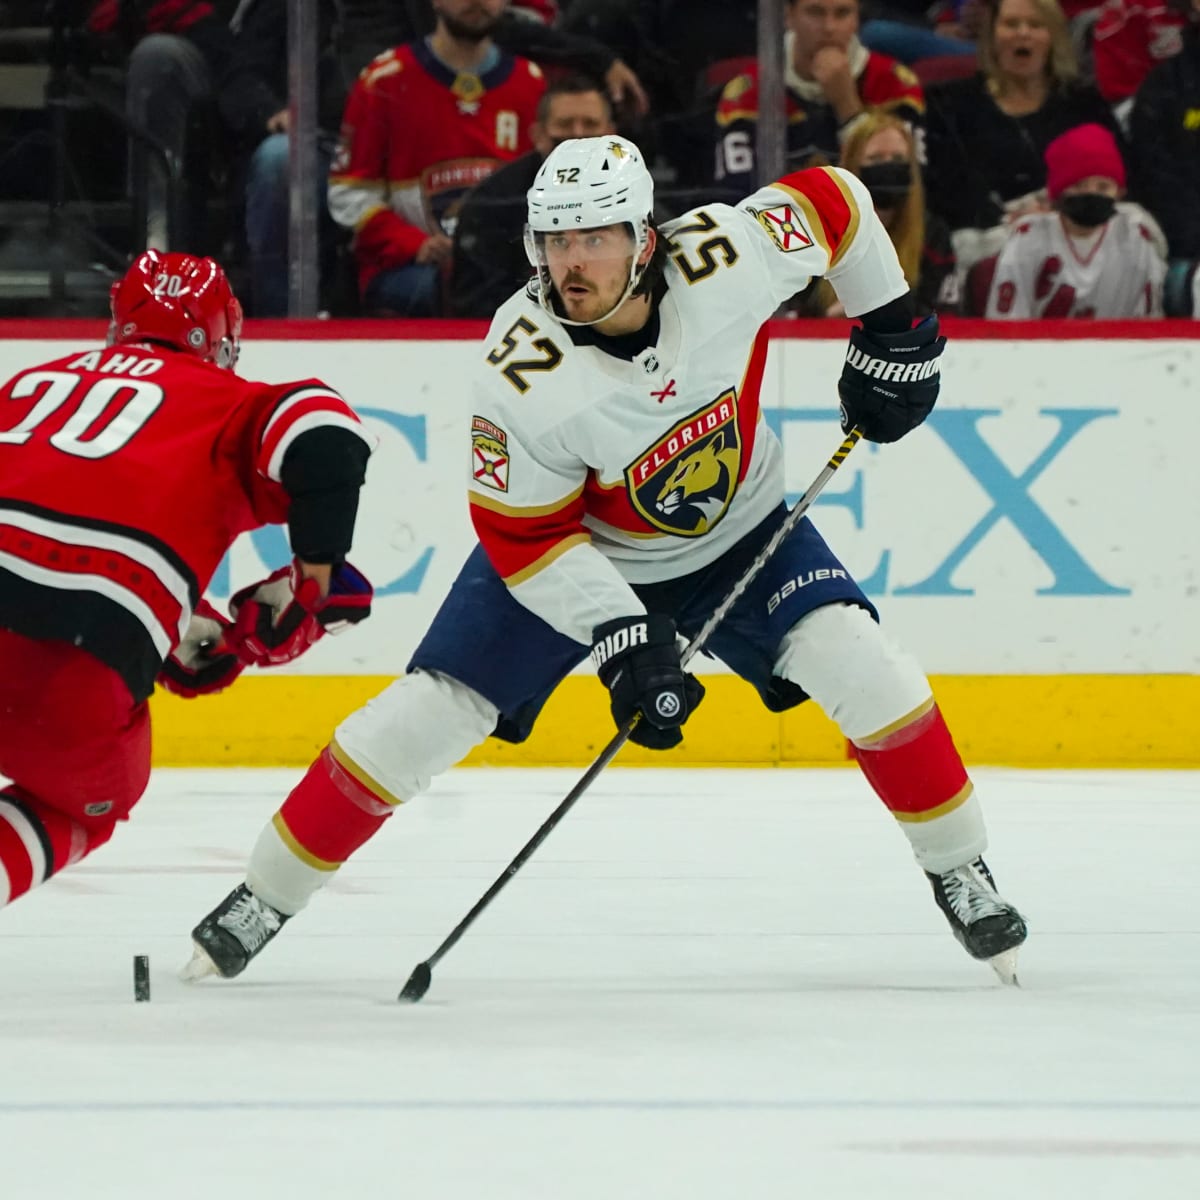 Carter Verhaeghe giving Florida Panthers serious bang for their buck